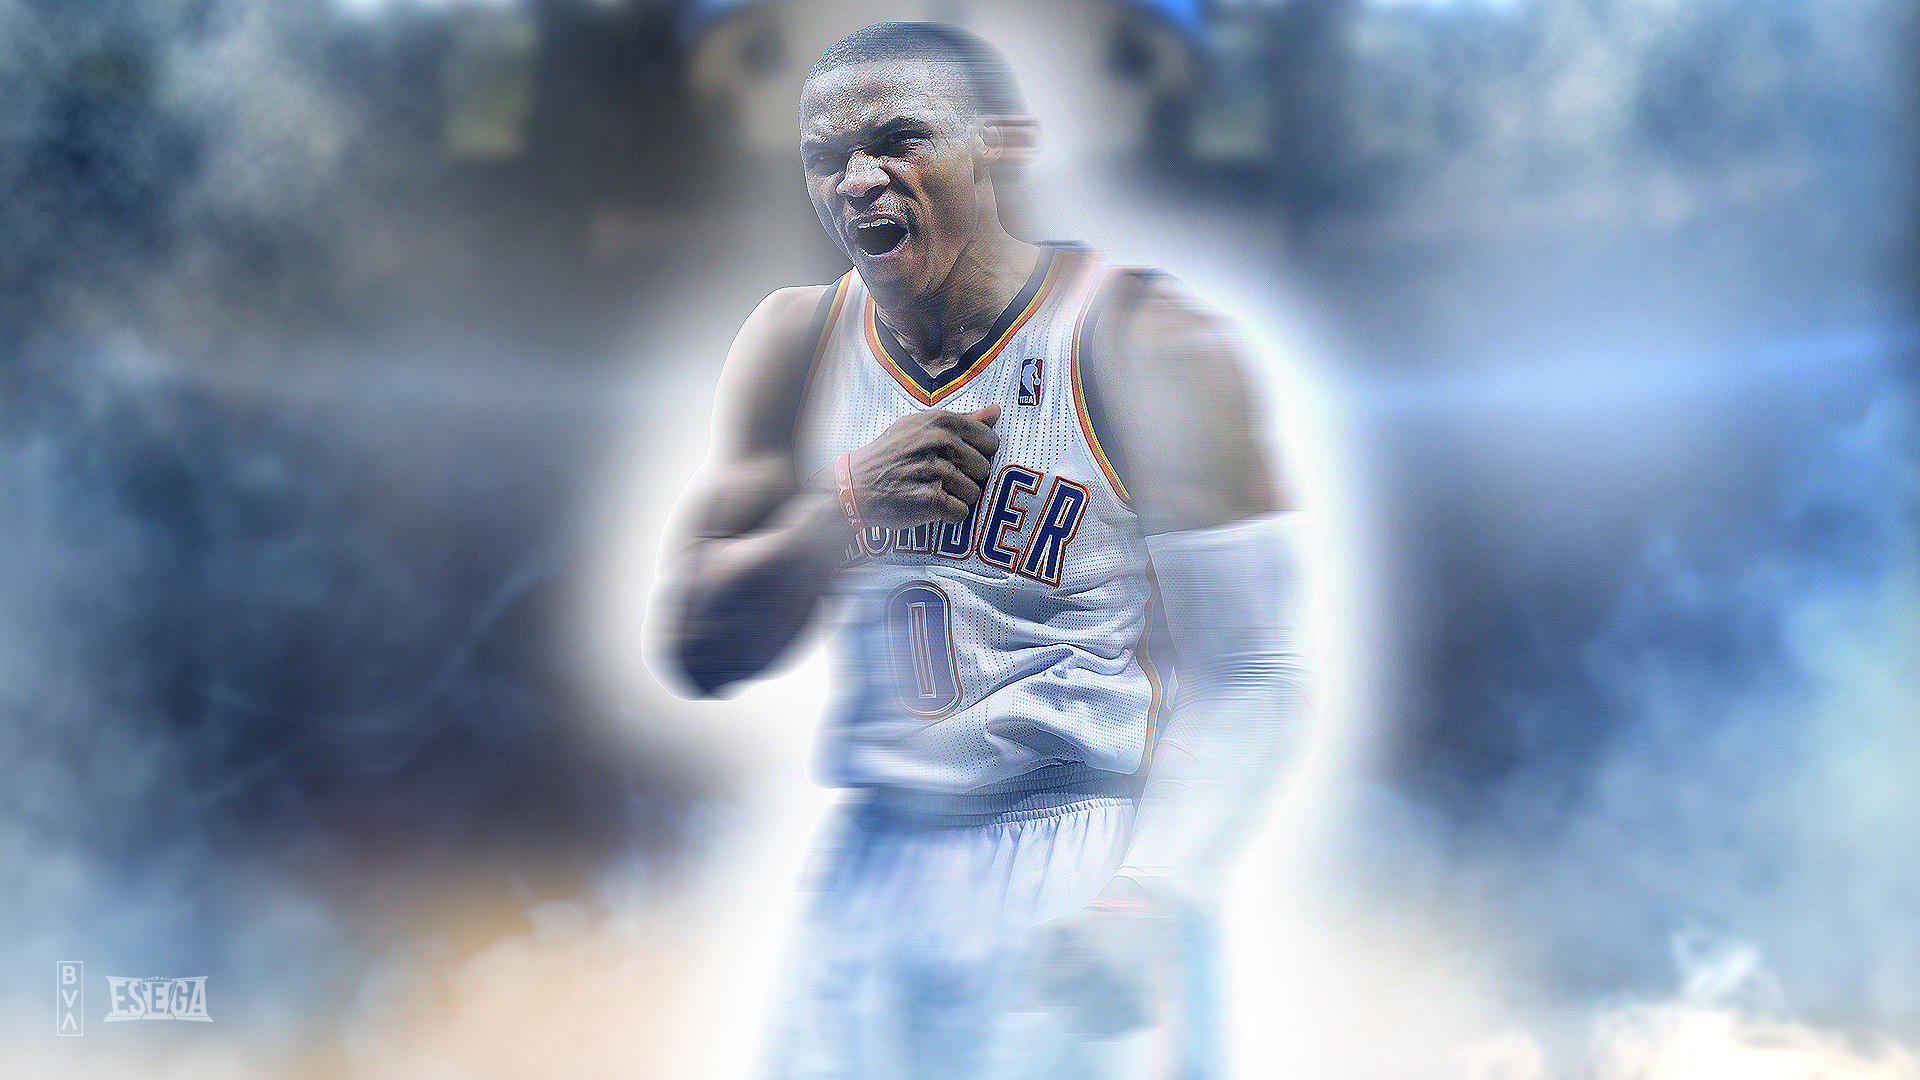 Mobile - Di Russell Westbrook , HD Wallpaper & Backgrounds